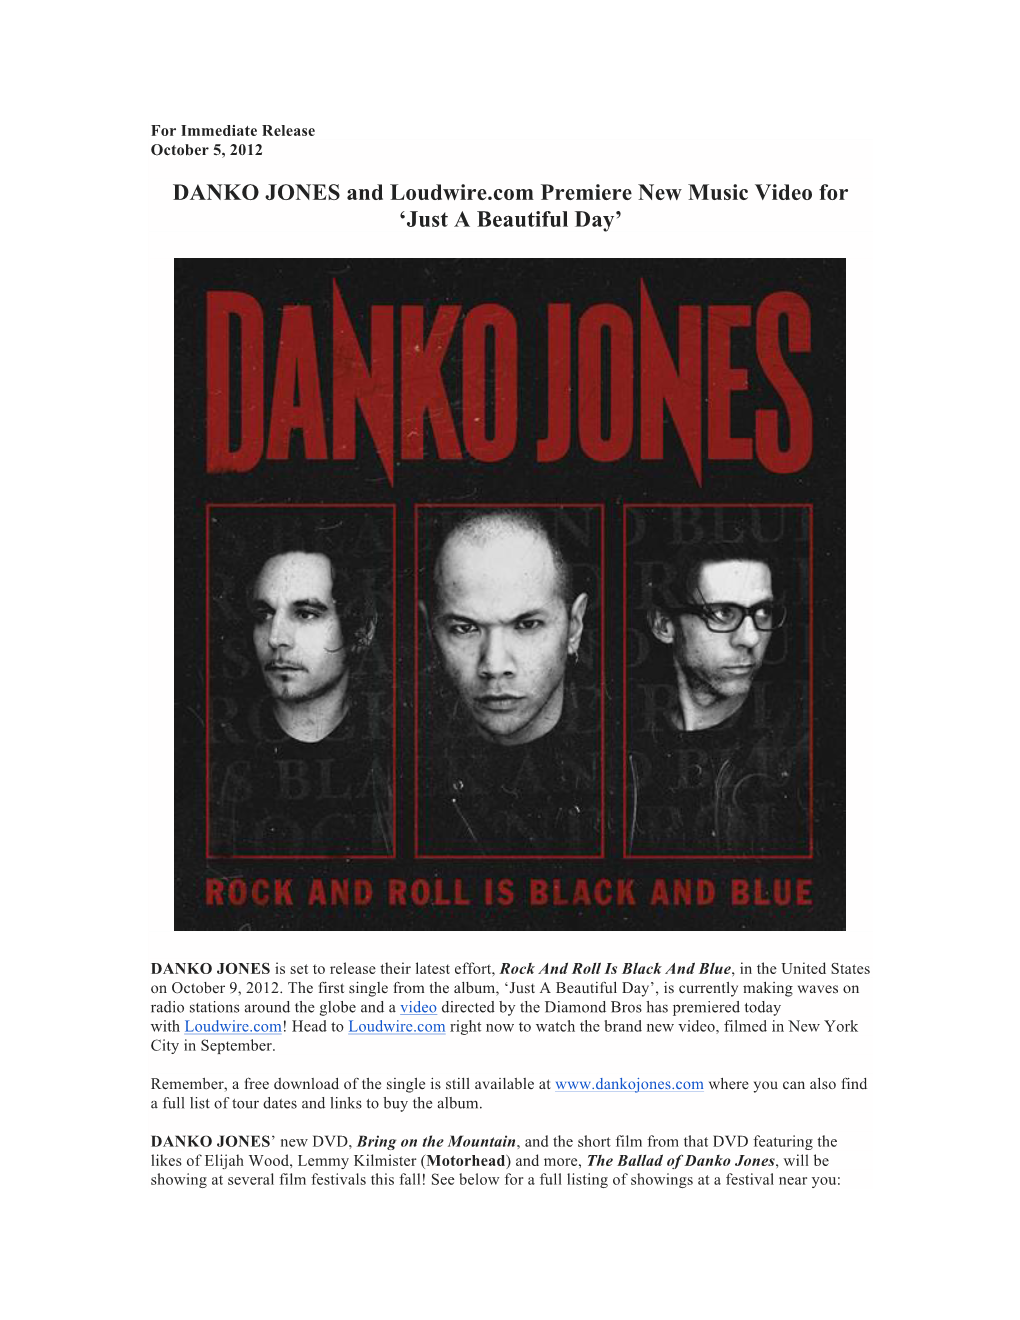 DANKO JONES and Loudwire.Com Premiere New Music Video for ‘Just a Beautiful Day’